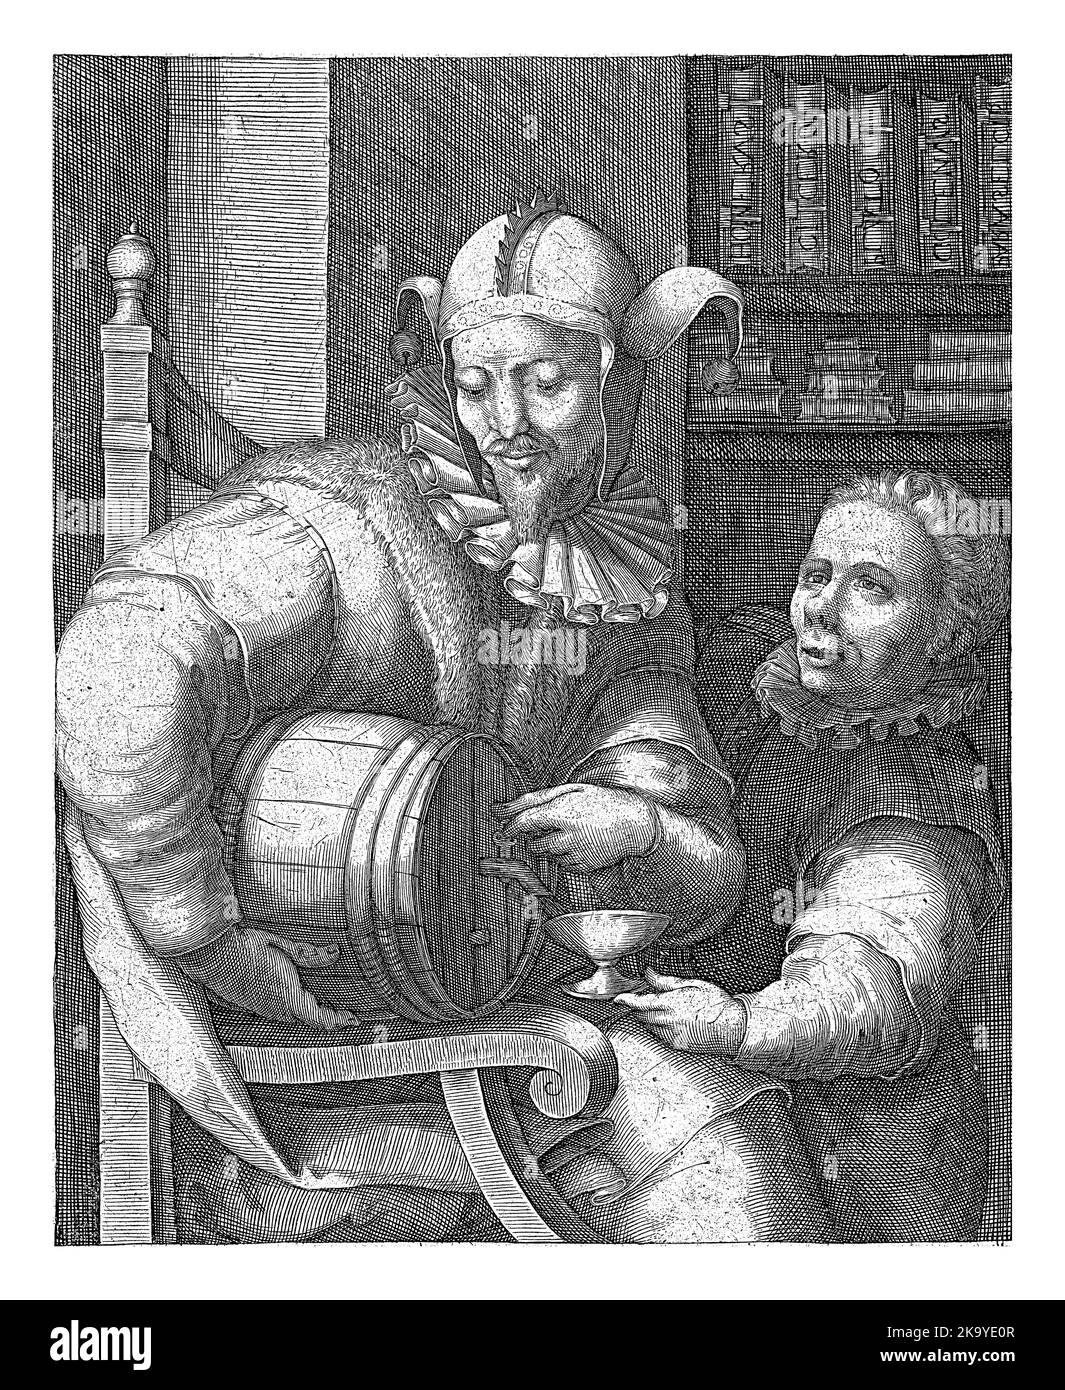 A jester sitting on a chair. Under his arm a keg with a tap. A man holds a bowl under the tap and fills it with wine. Stock Photo